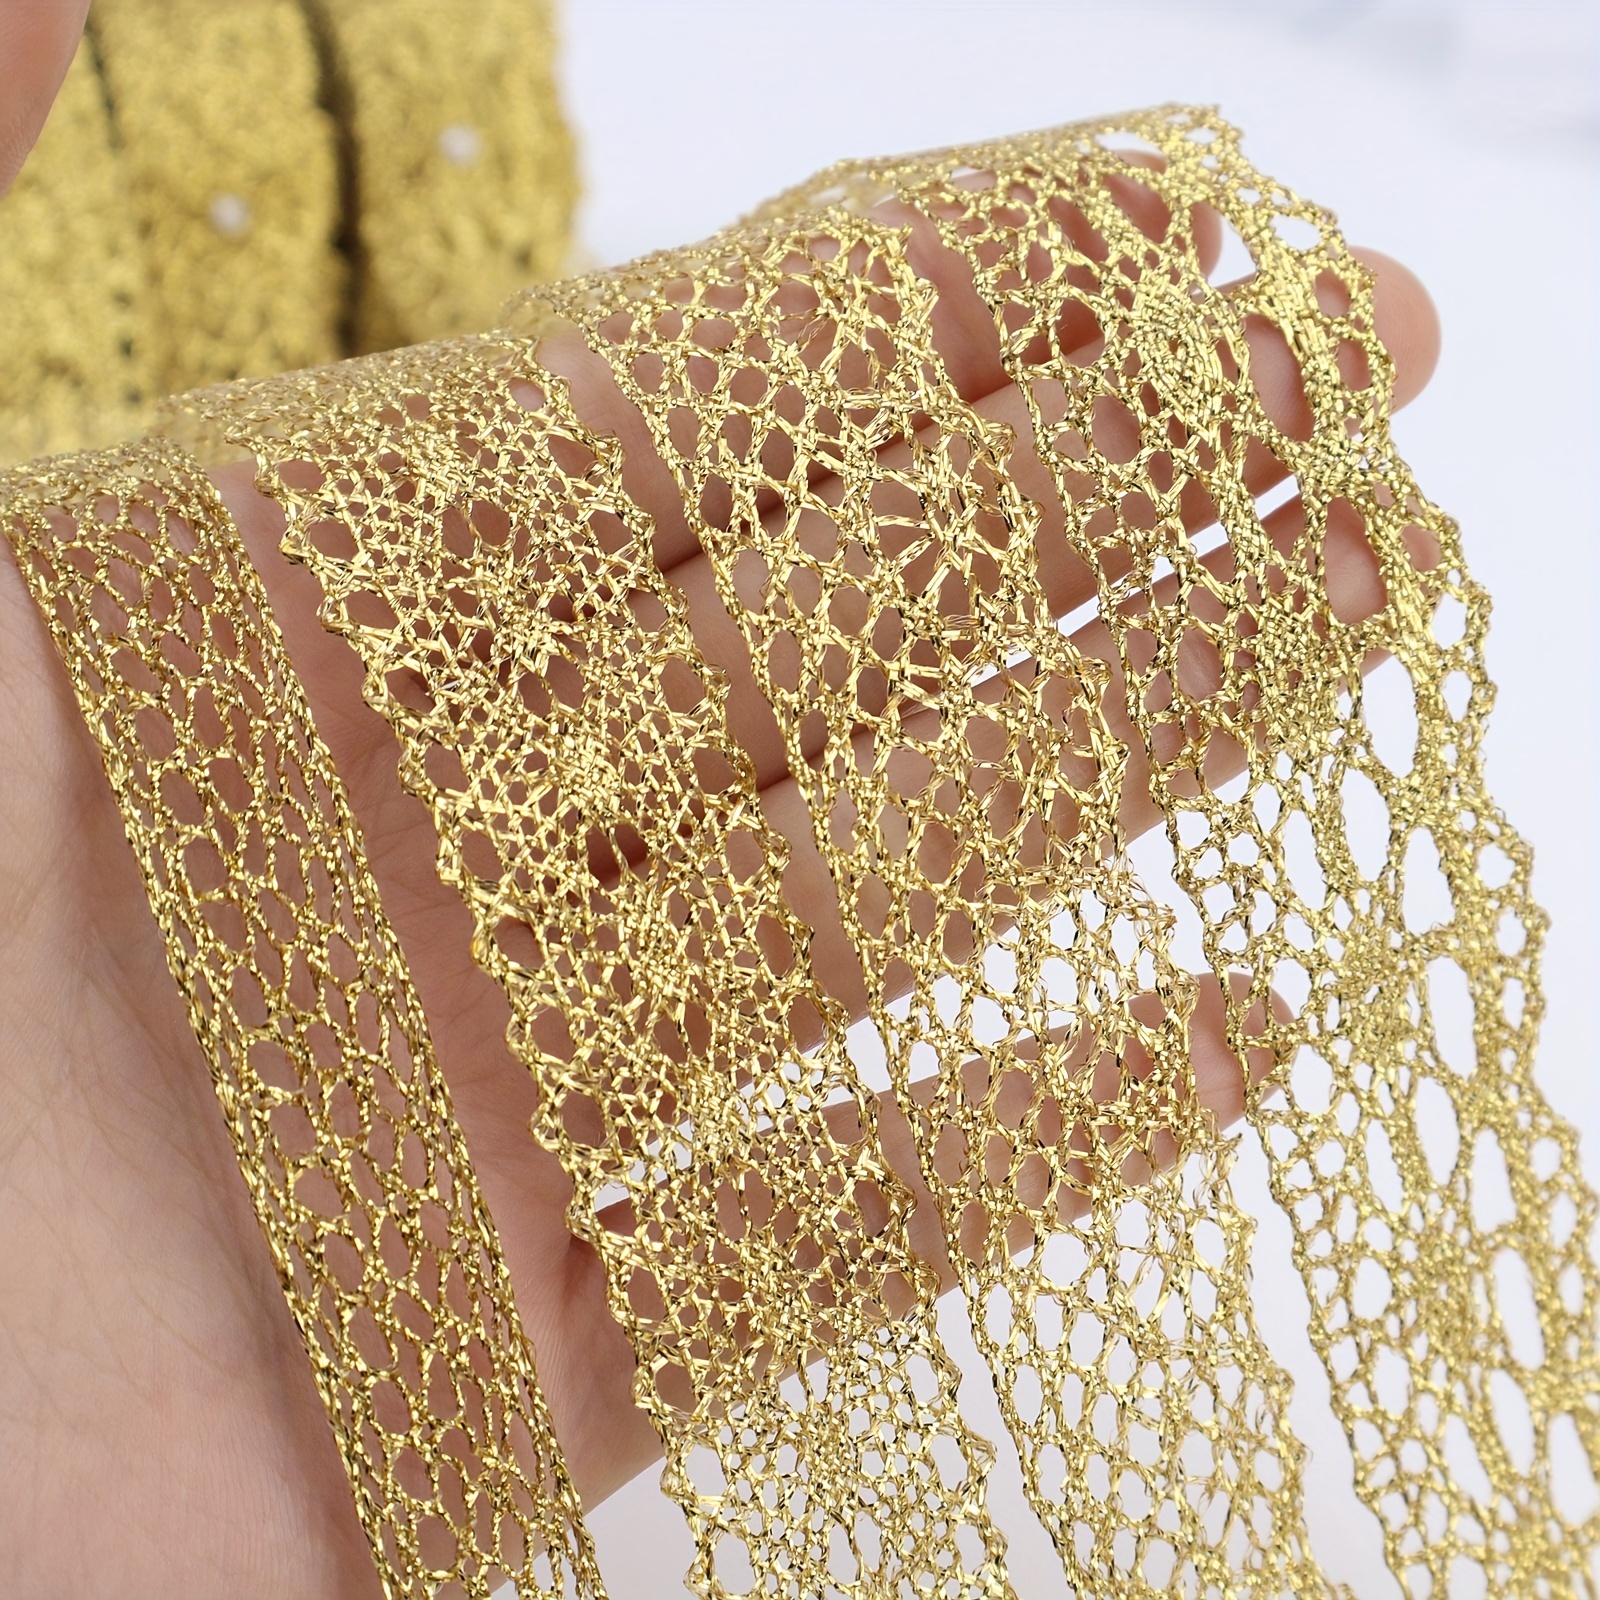 Gold Lace Ribbon 20 Yards Vintage Crochet Lace Trim Craft Gold Lace for  Sewing, Gift Package Wrapping, Bridal Wedding Decoration, Scrapbooking